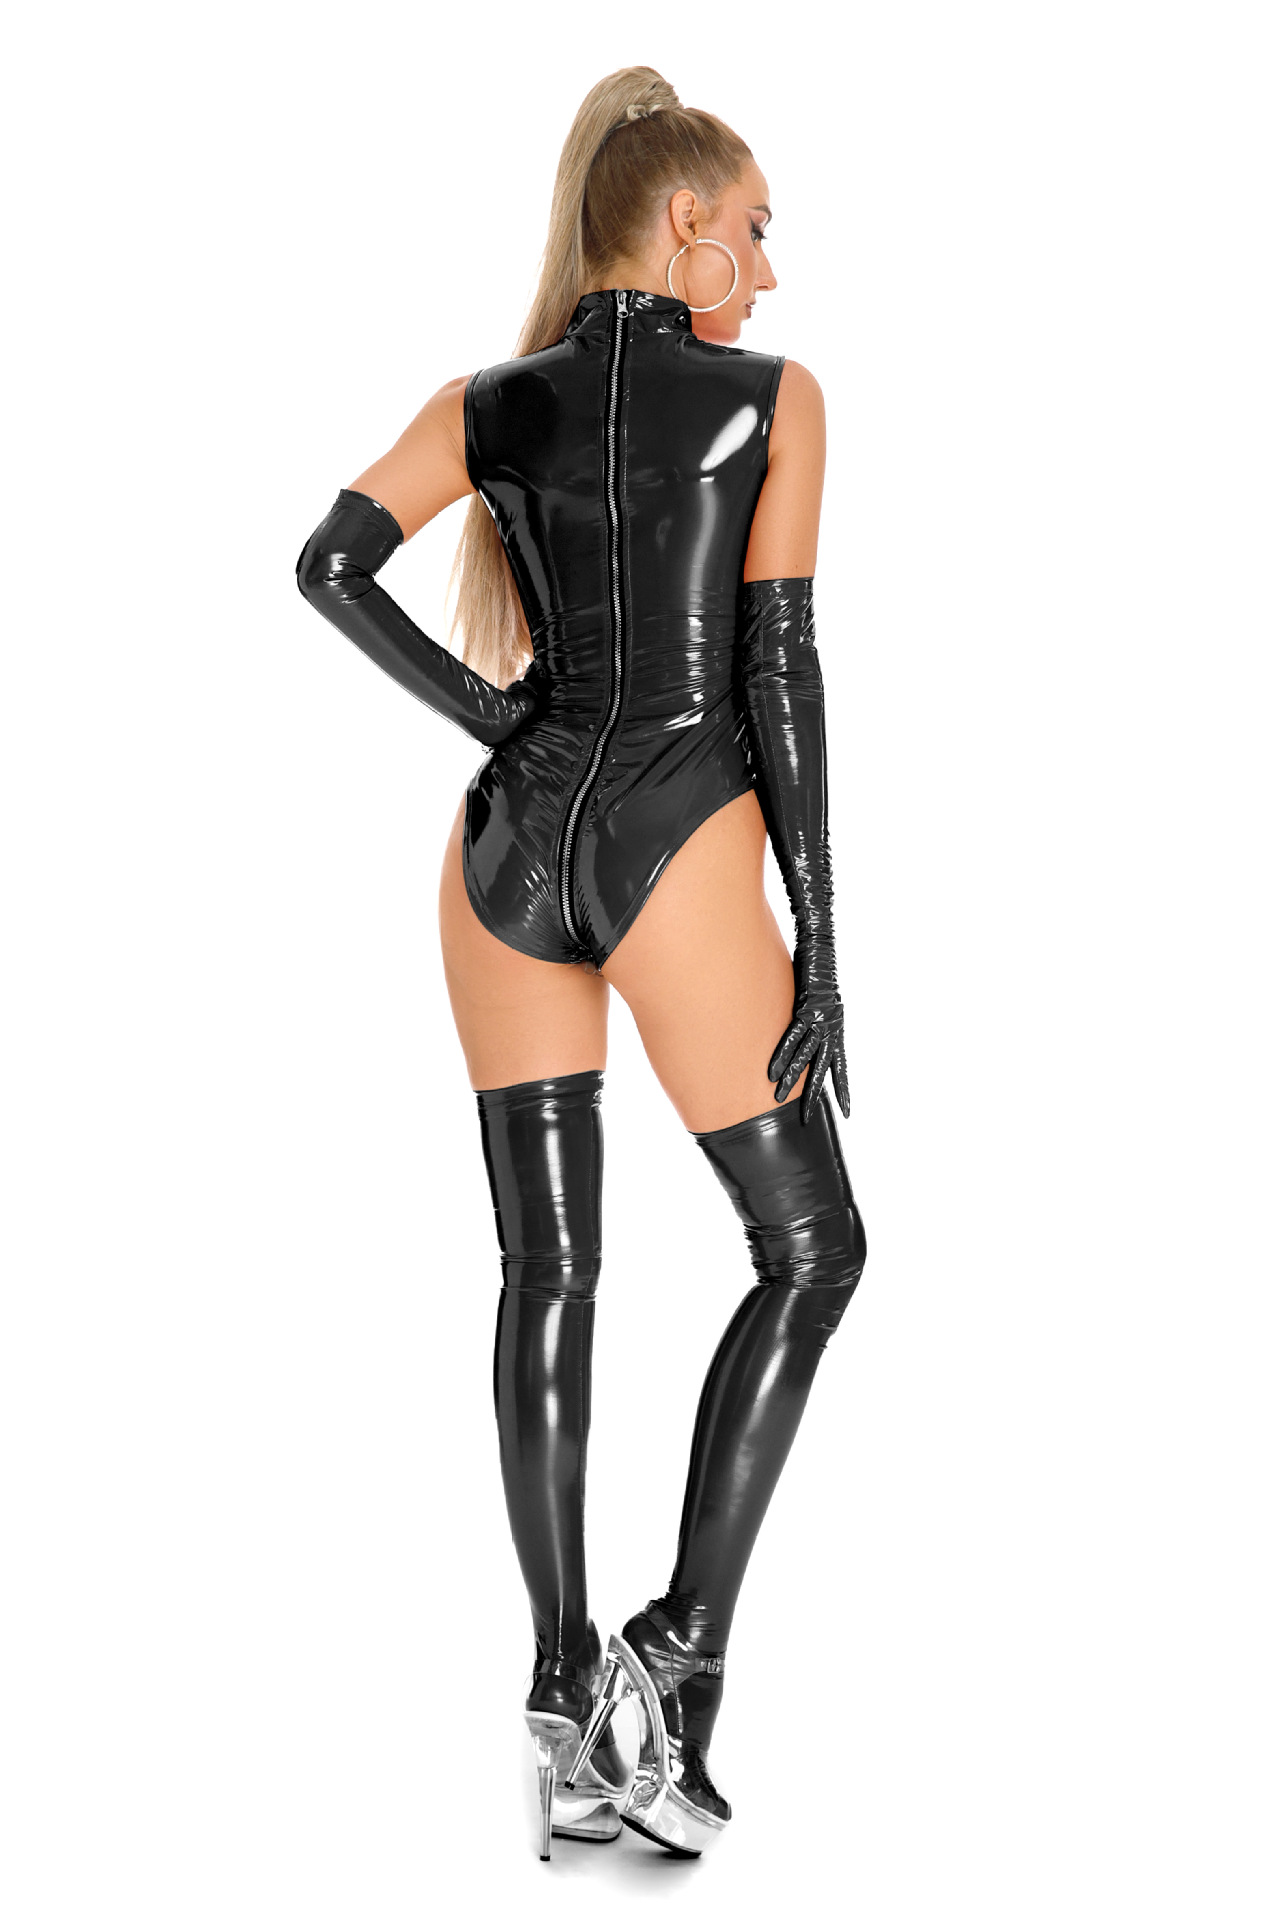 6861--High elastic patent leather zippered breast-revealing crotch jumpsuit suit